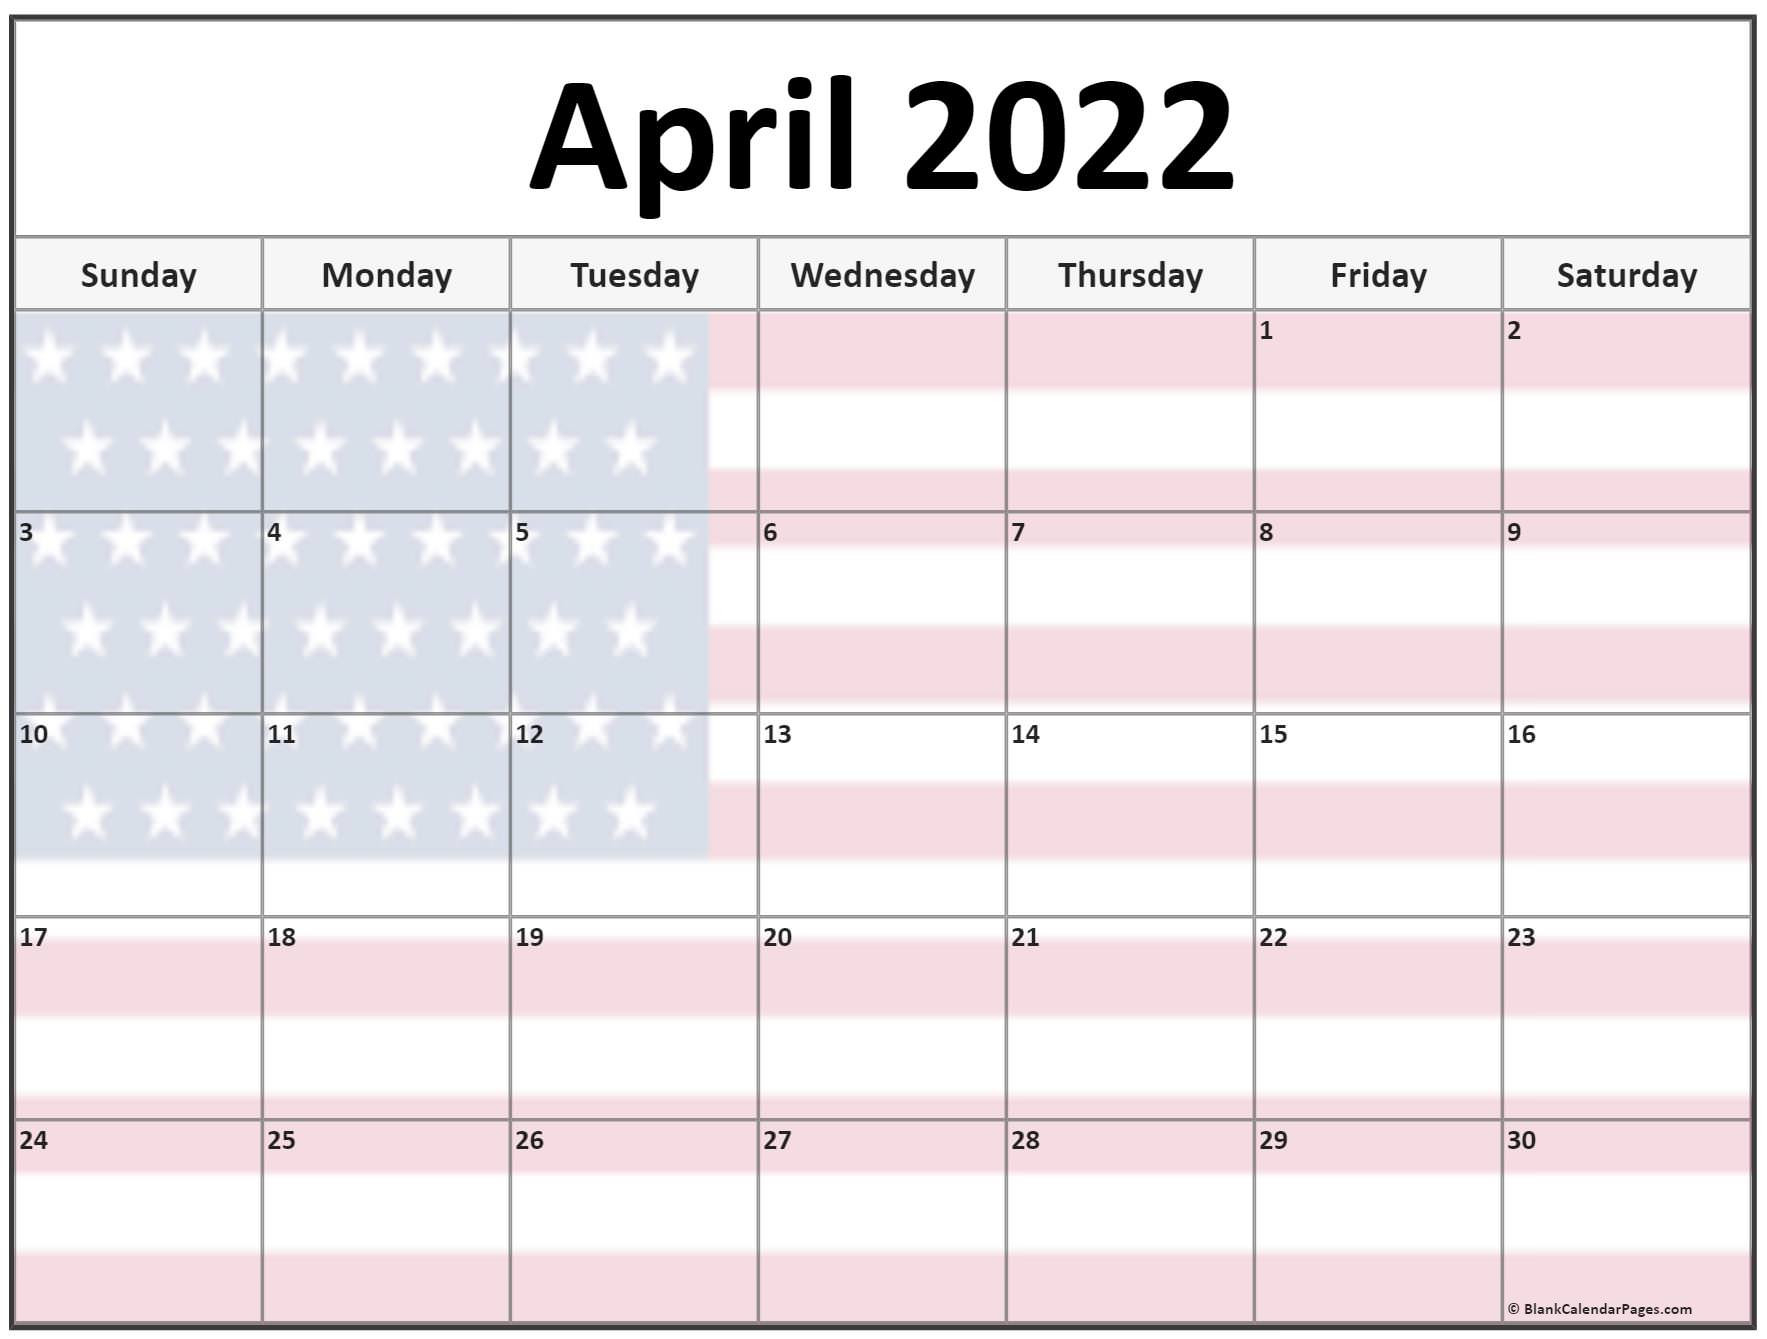 Collection Of April 2022 Photo Calendars With Image Filters.  Blank April 2022 Calendar Printable